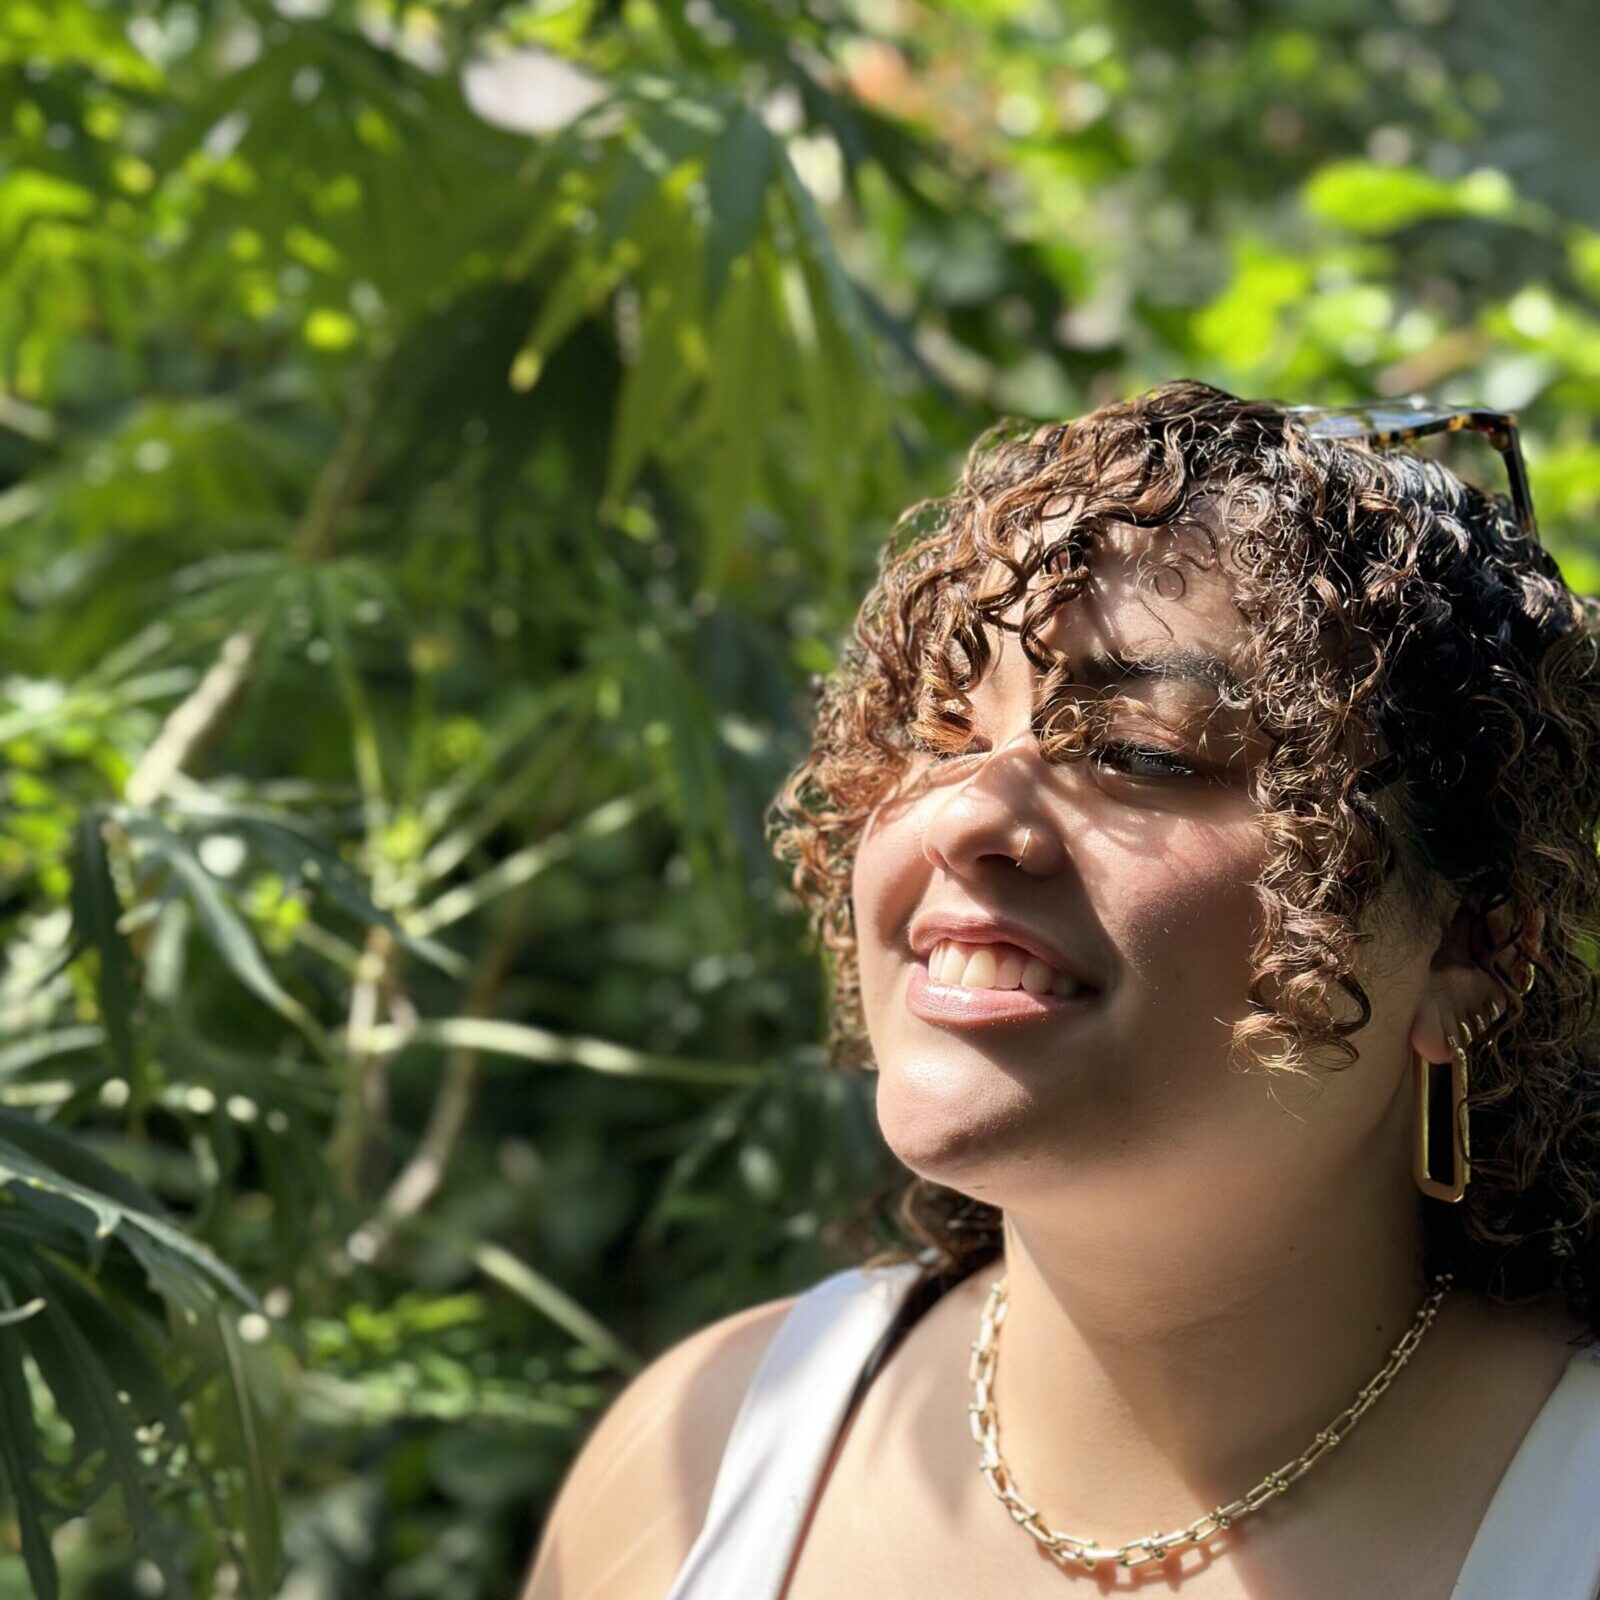 Ranny, a light-skinned Southeastern Asian and Black woman with curly brown bangs is facing outward and smiling in the sunshine with a background of big green leaves. They're wearing a white tank top and gold chain necklace.